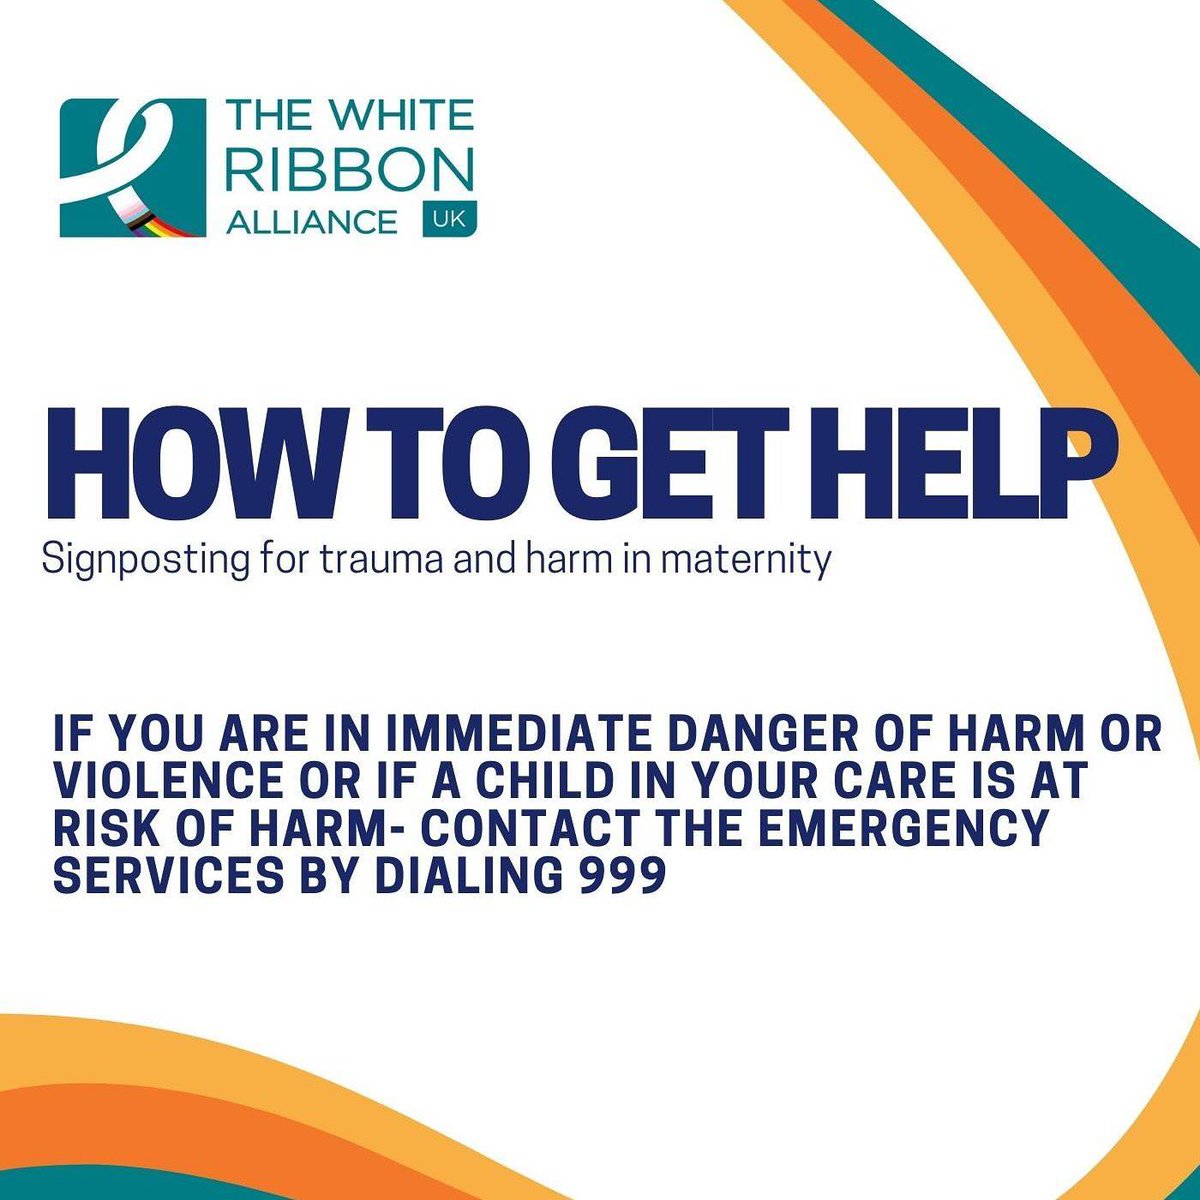 Please take care of yourself when reading the APPG report on birth trauma. It’s an important but traumatic read. How to get help guide can be found here: zurl.co/NfMG #BirthTraumaInquiry #obstetricviolence #actionNOW #APPG.